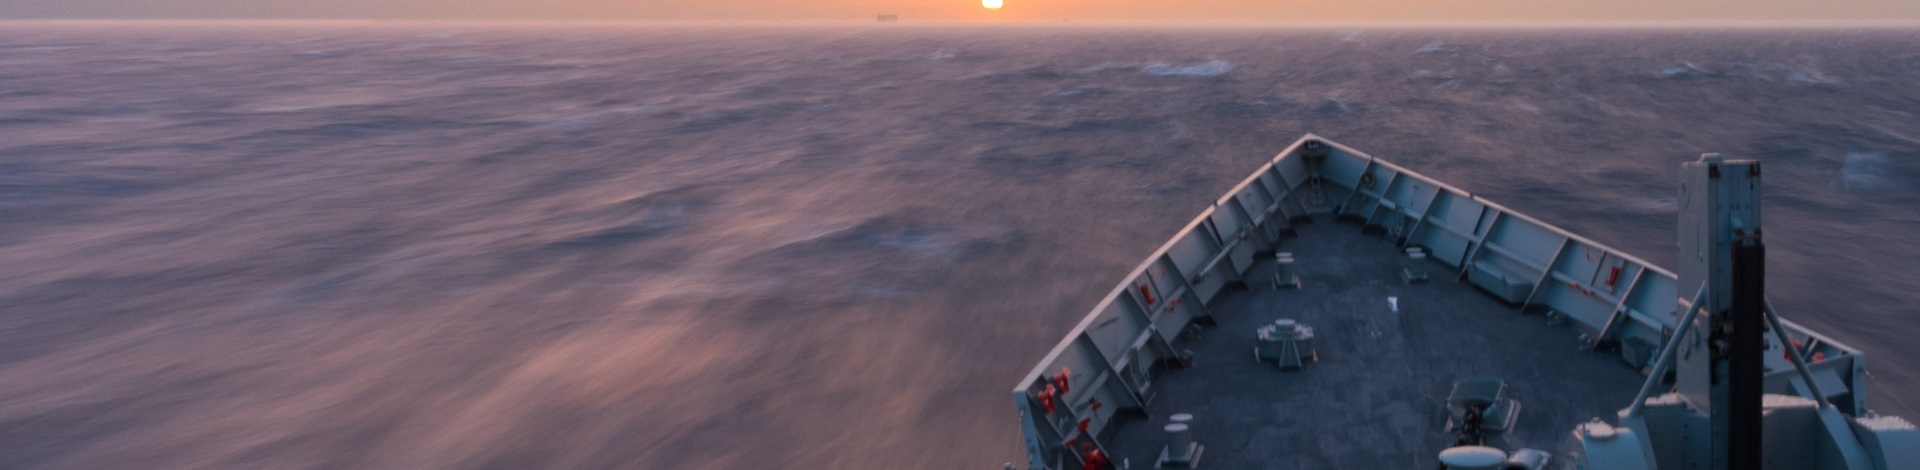 A ship sailing into a beautiful sunset, viewed from the front of another ship.